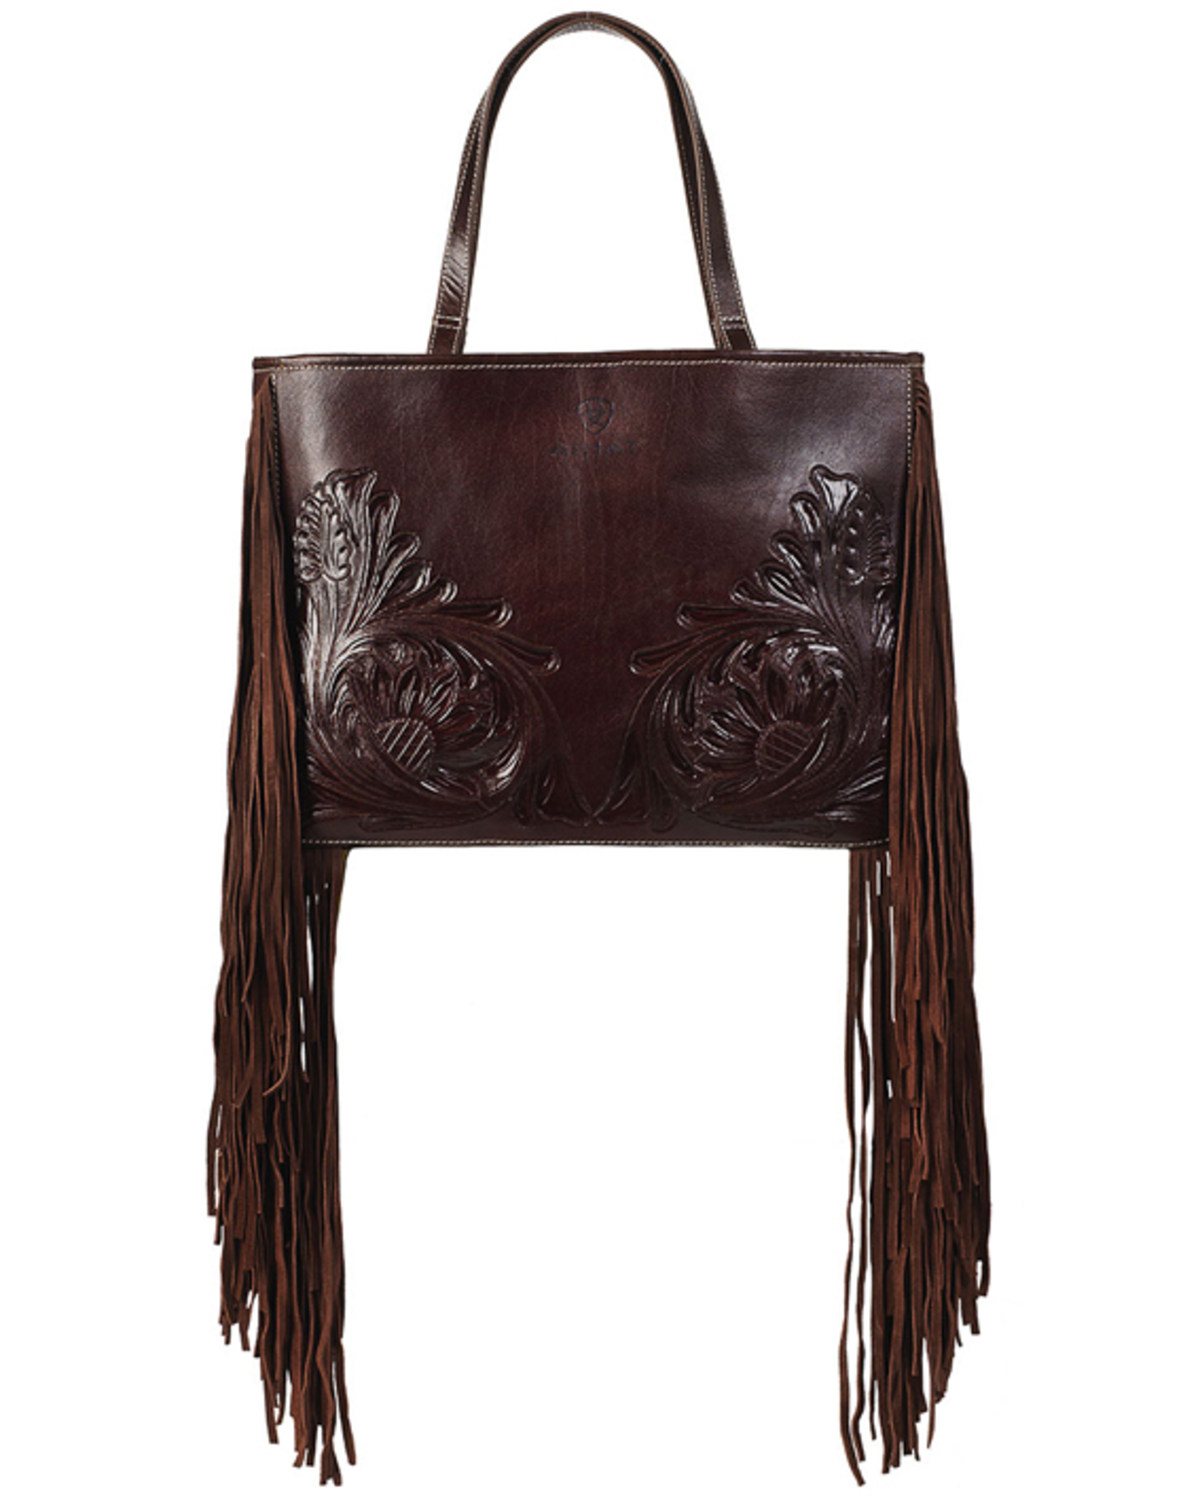 Ariat Women's Victoria Tooled Leather Fringe Concealed Carry Tote Bag